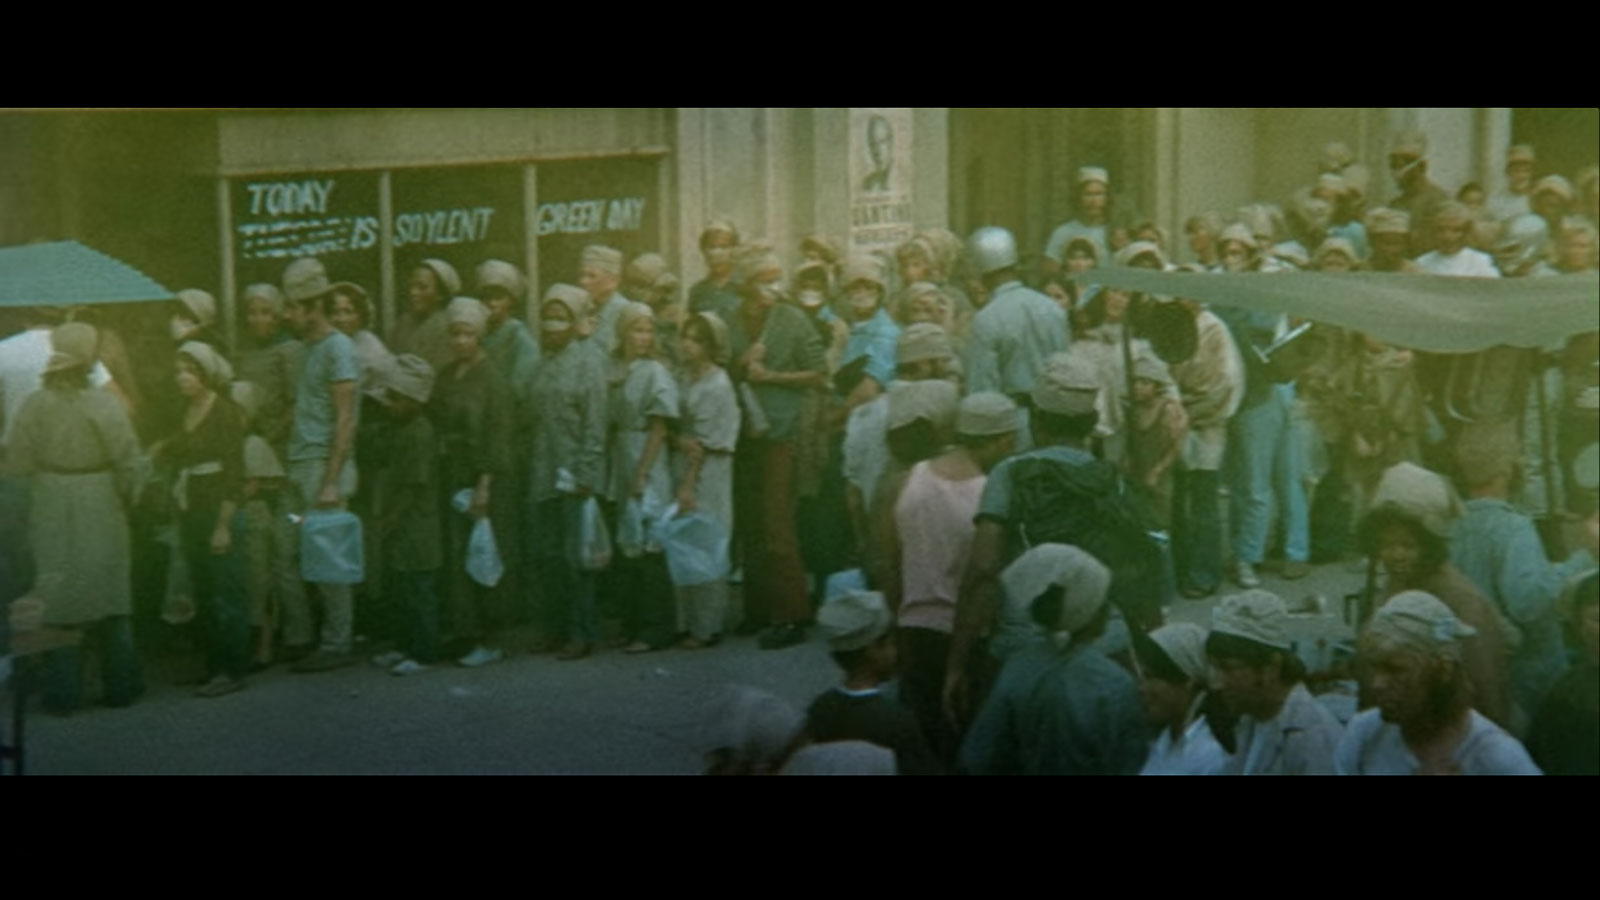 From the film Soylent Green: crowd of people waiting outside storefront reading "Today is soylent green day"